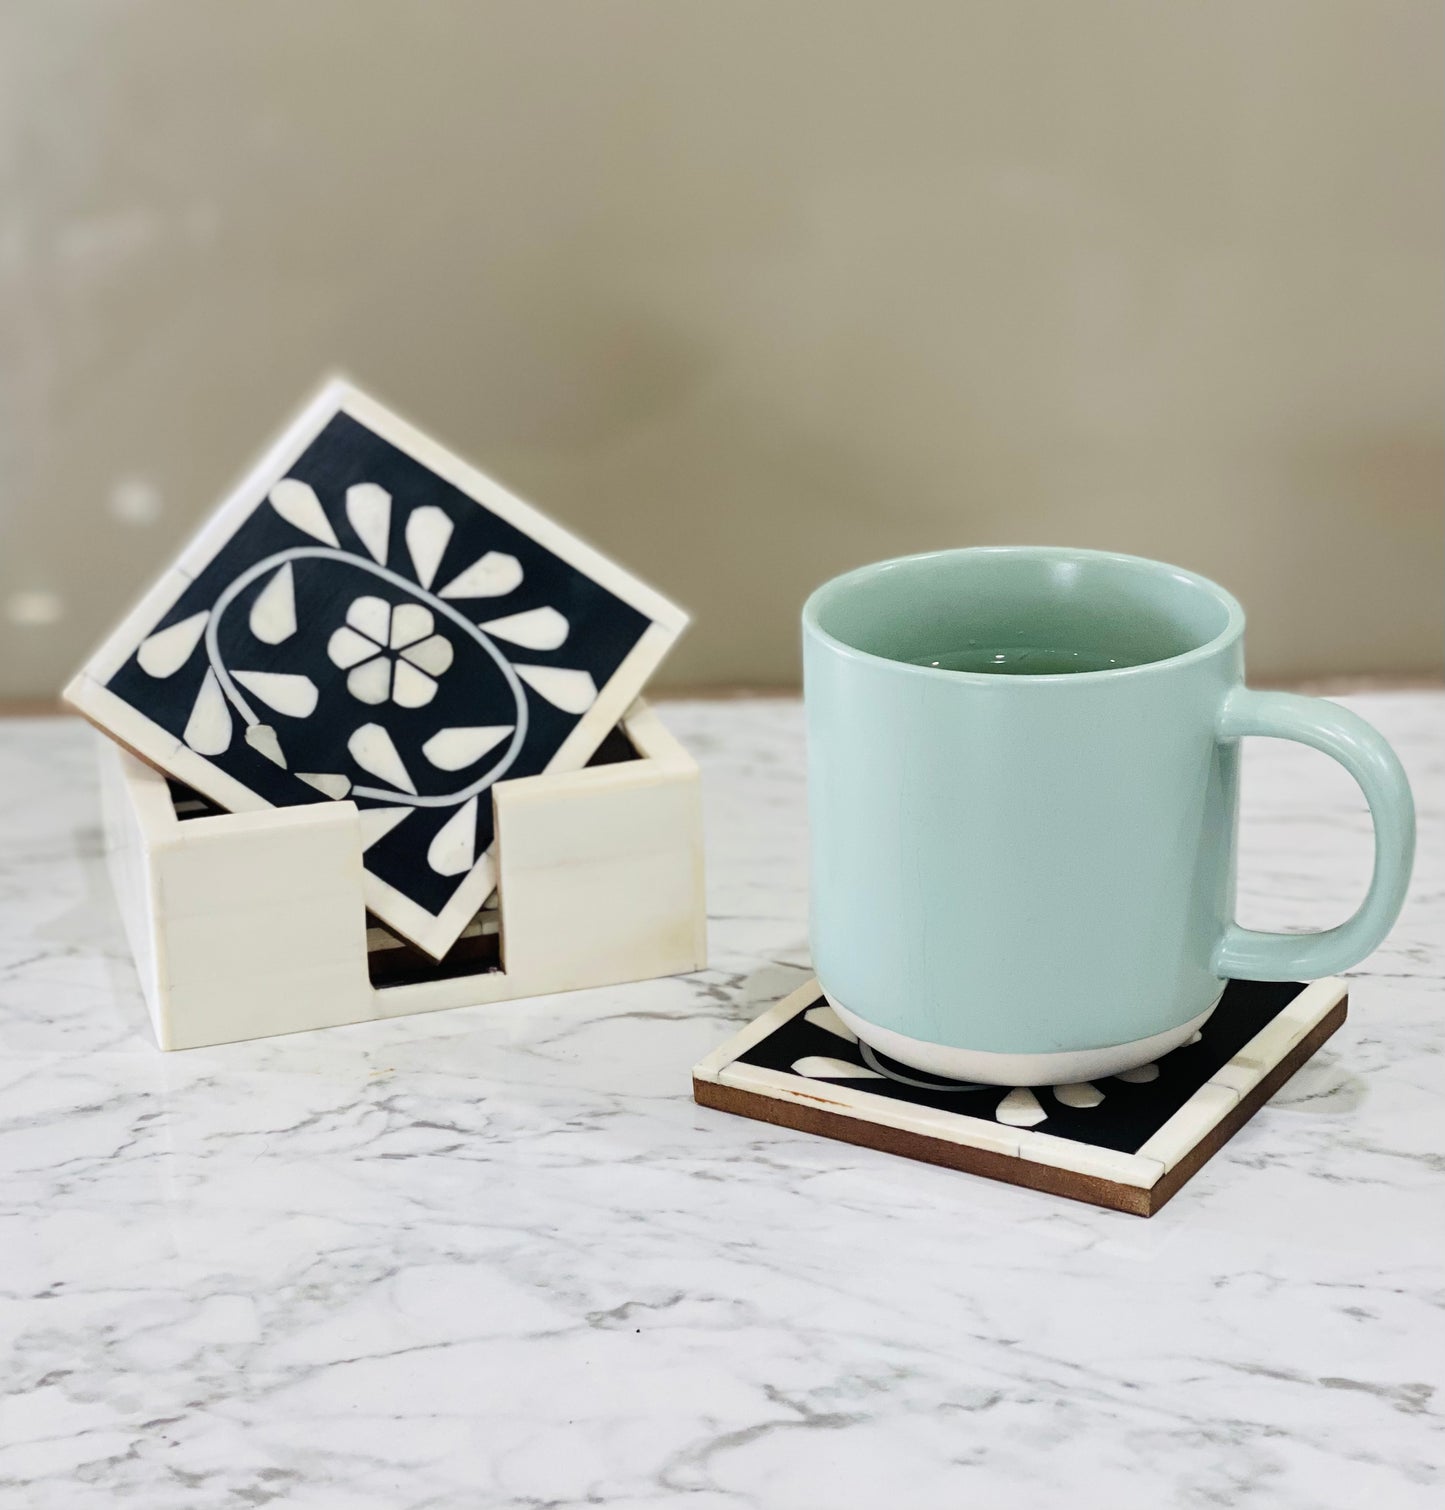 Coaster with holder